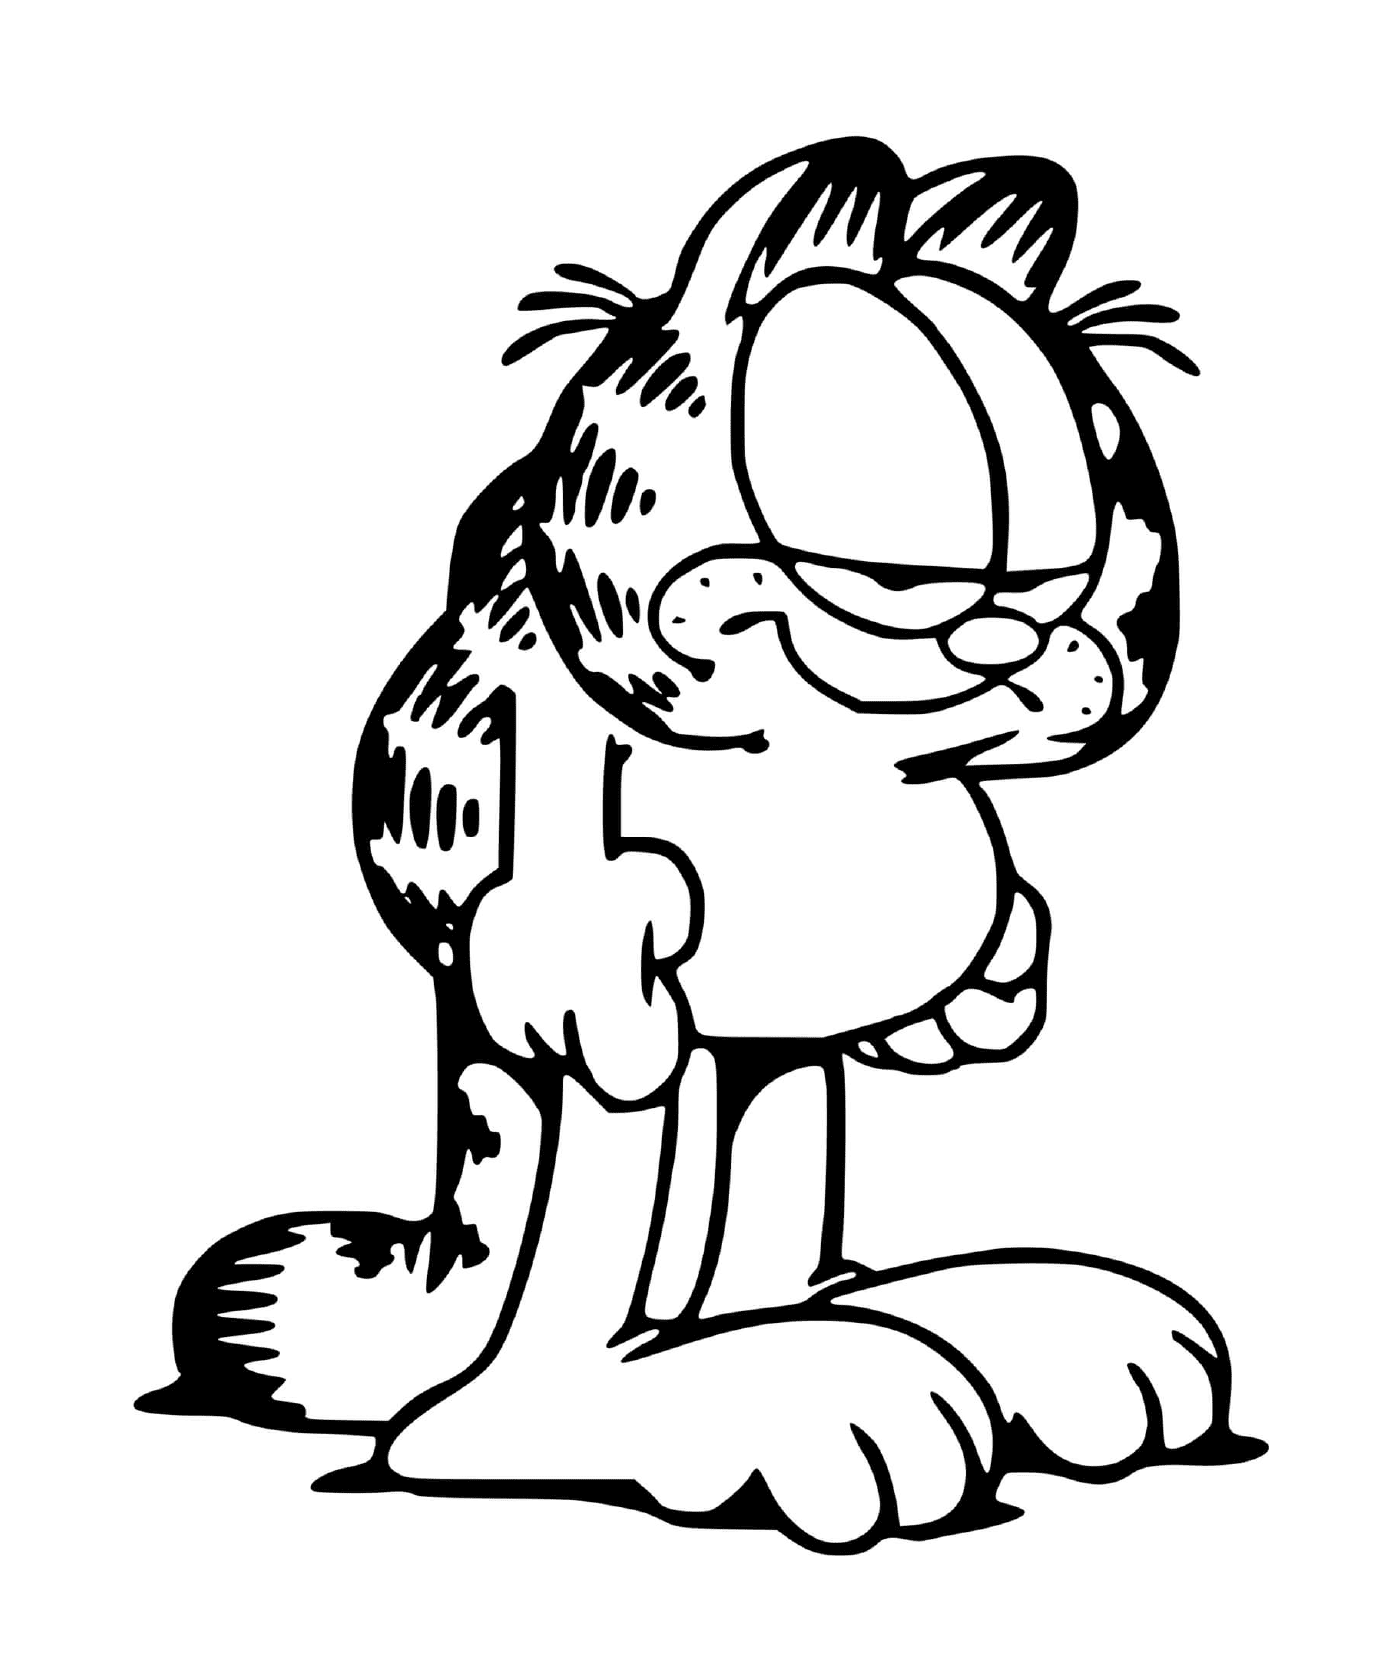  Garfield always tired and exhausted 